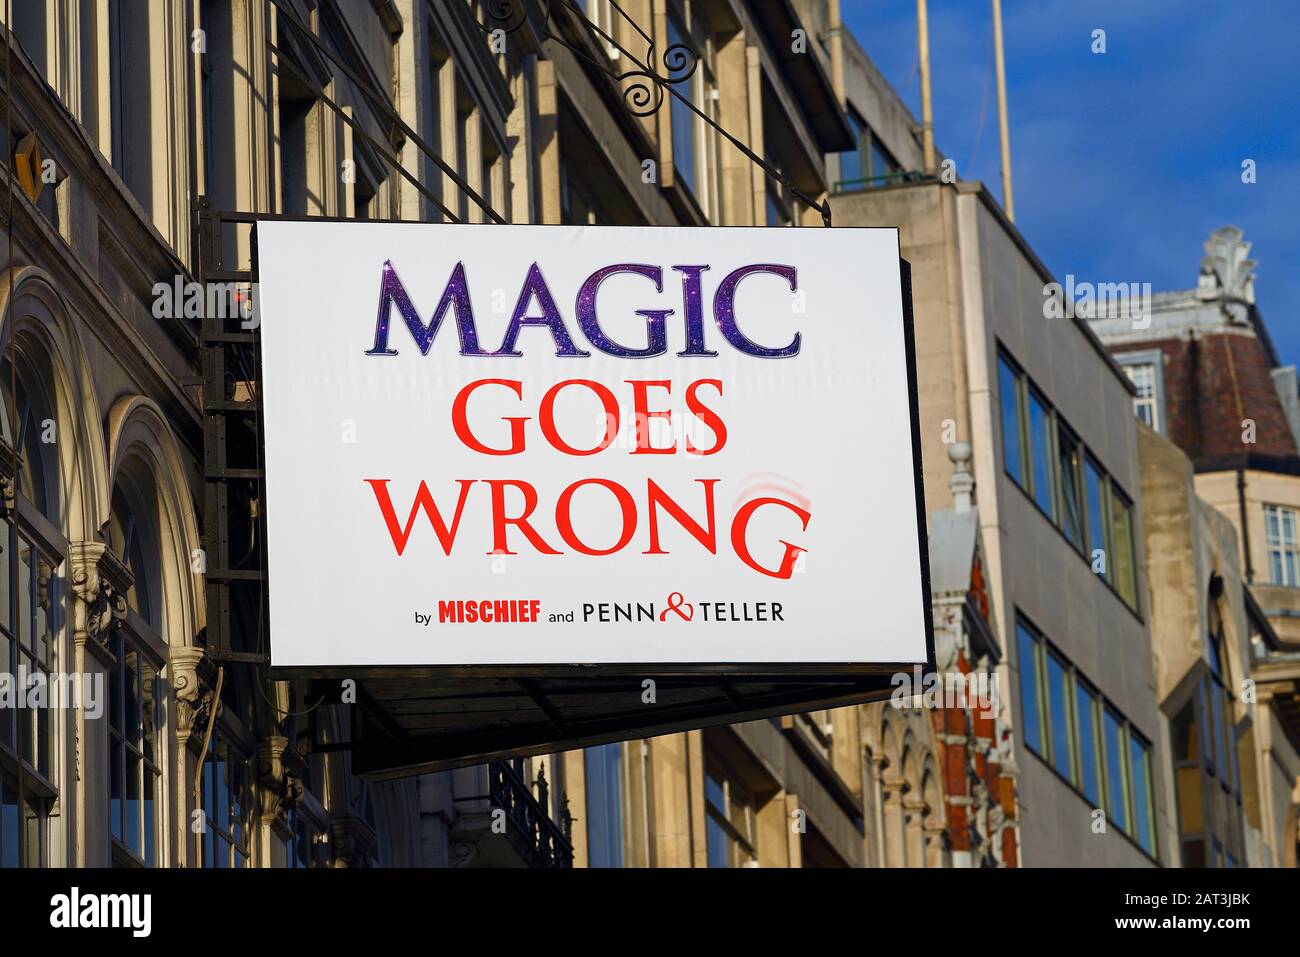 London, England, UK. 'Magic Goes Wrong' at the Vaudeville Theatre, Strand. Magic show by Mischief Theatre and Penn & Teller (Jan 2020) Stock Photo